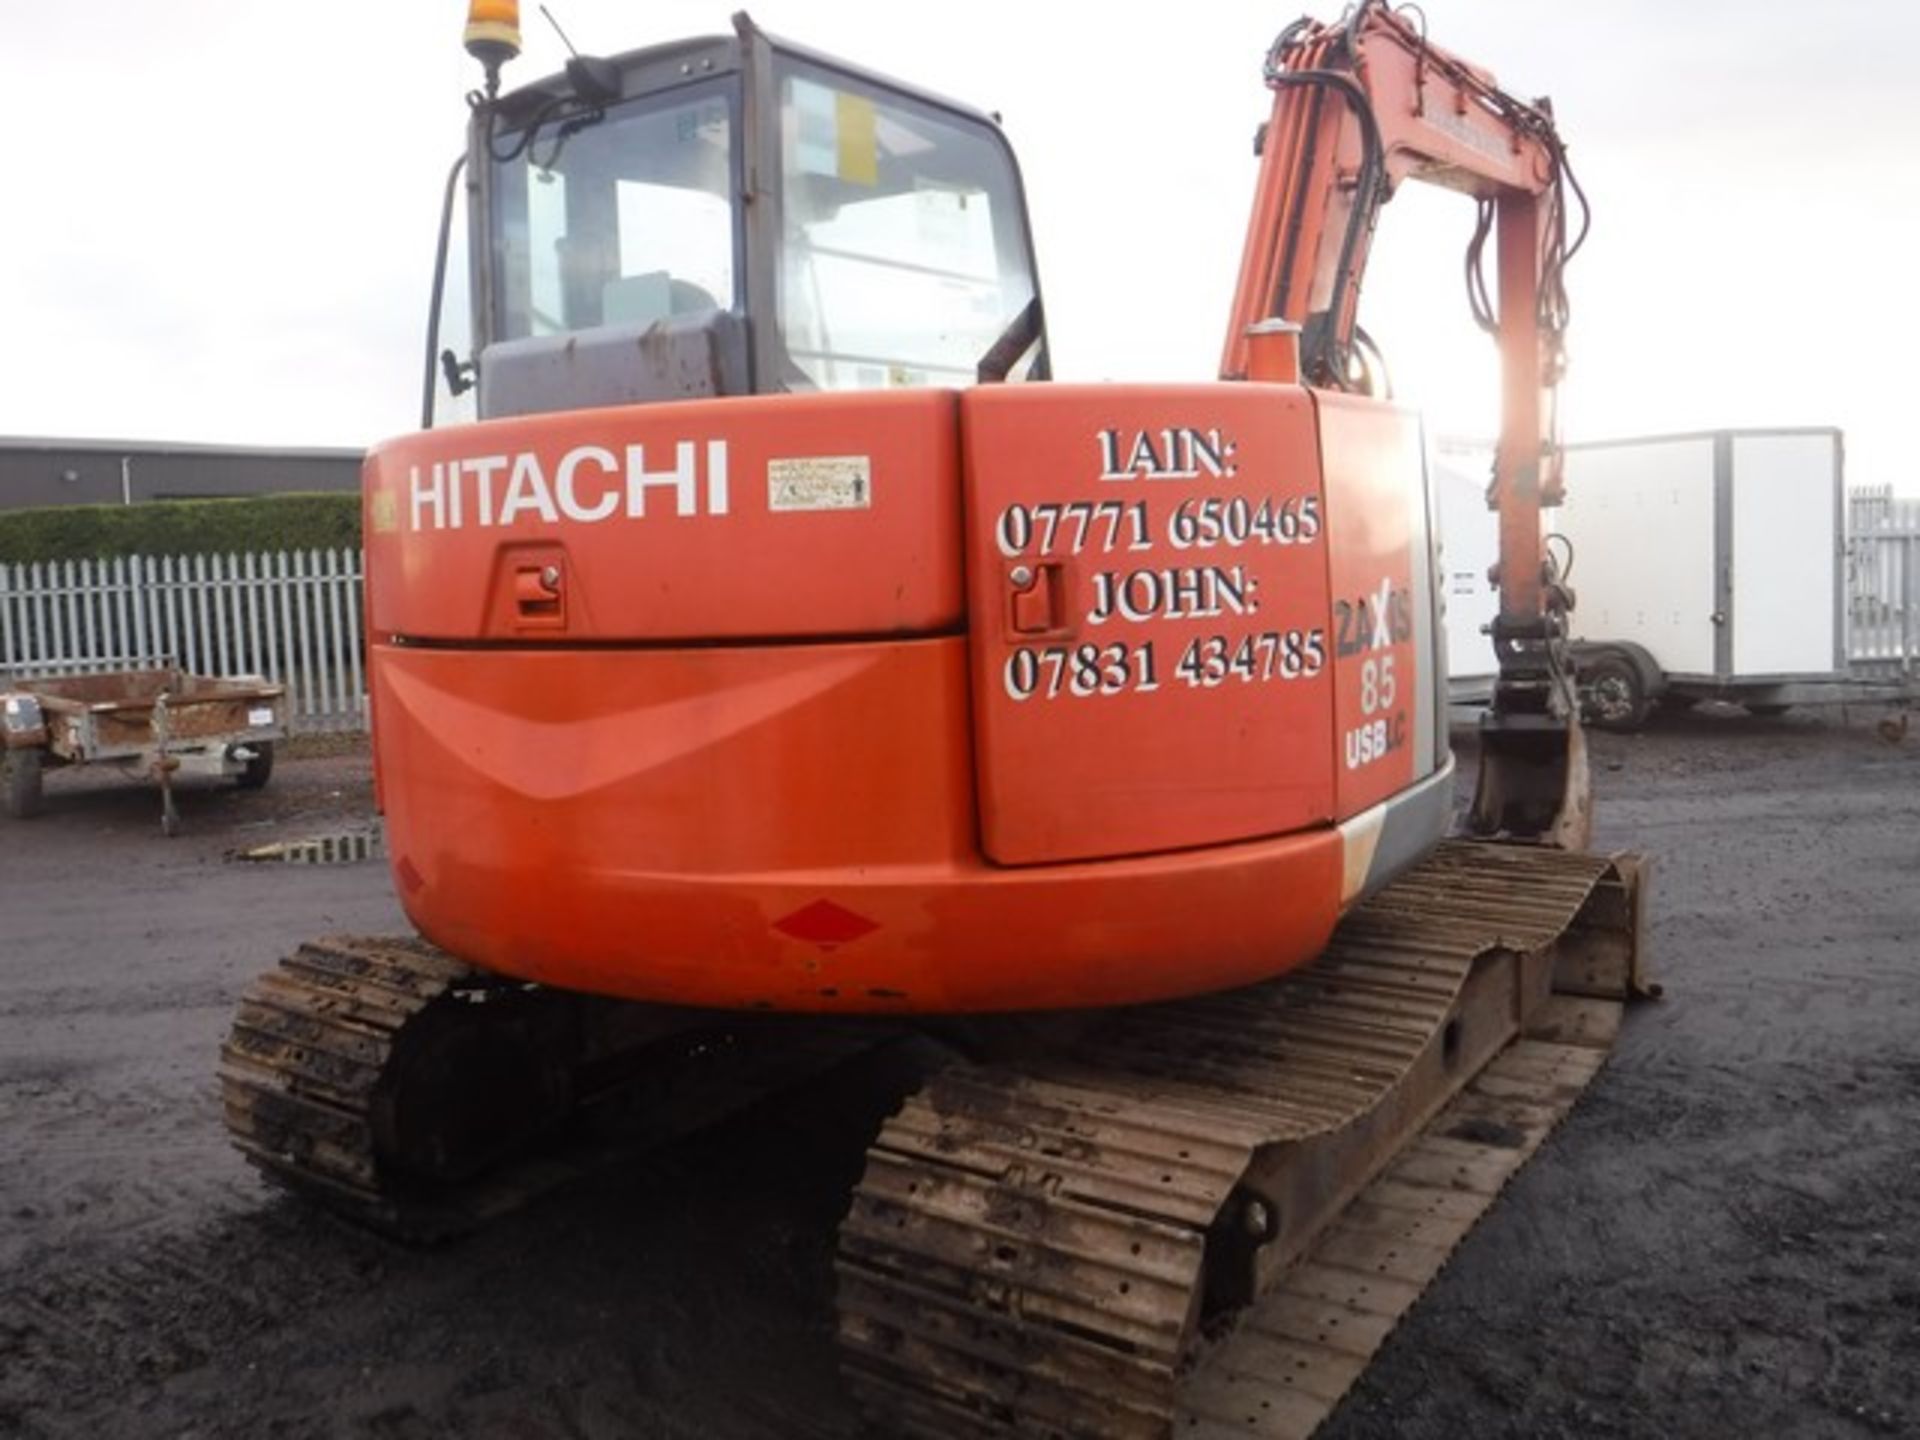 2009 HITACHI 360 EXCAVATOR ZAXIS 85 C/W 3 BUCKETS AND QUICK HITCH 6441HRS (NOT VERIFIED) - Image 12 of 27